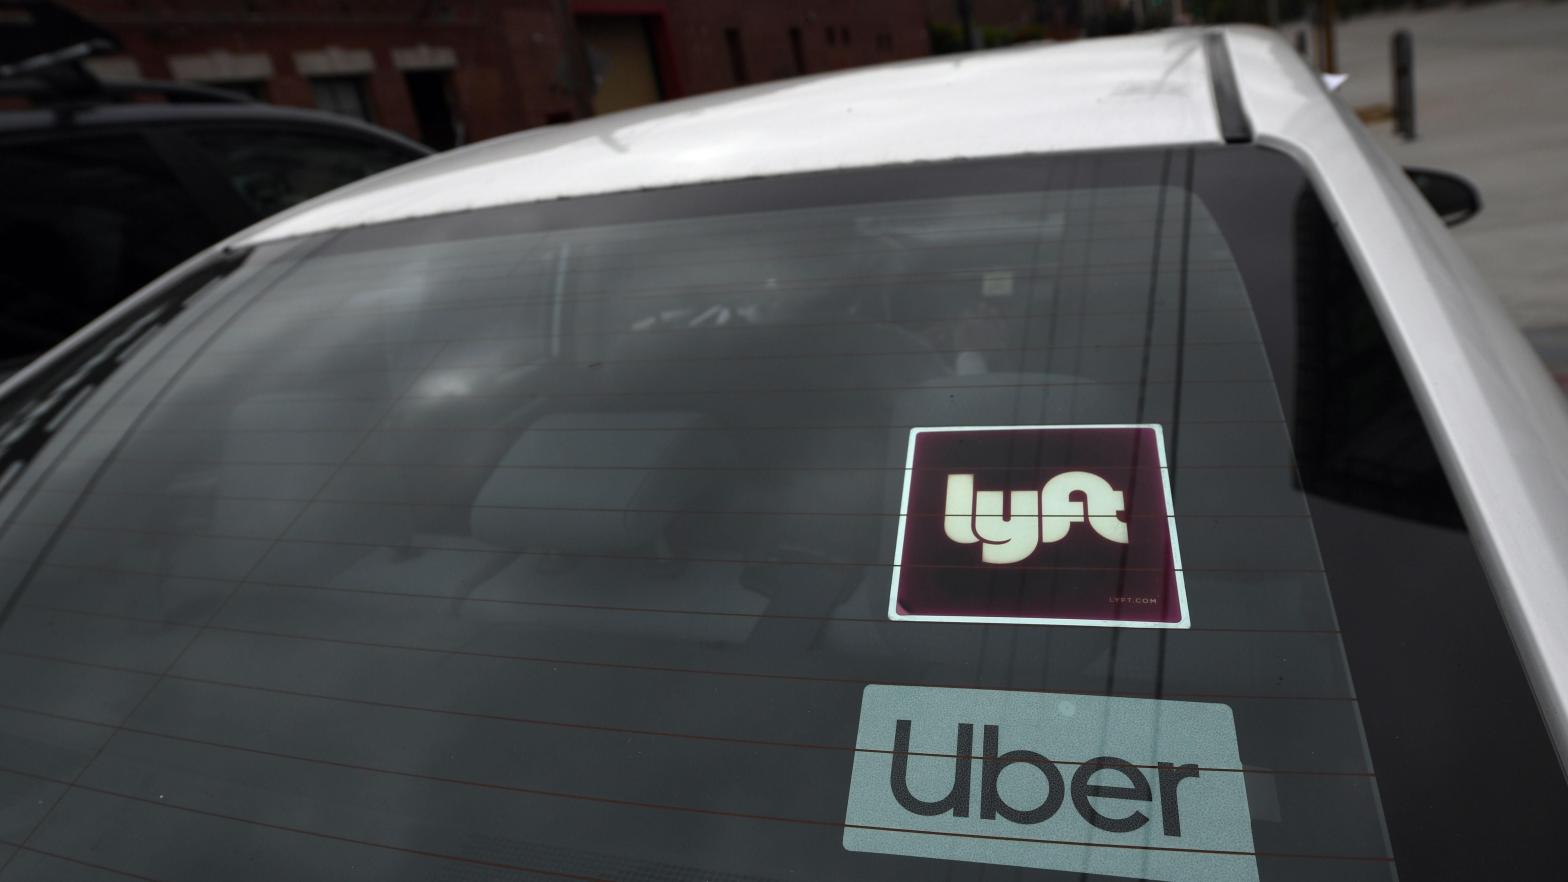 Uber's revenue doubled from this time last year, while Lyft saw a loss from quarter to quarter. (Photo: Robyn Beck, Getty Images)